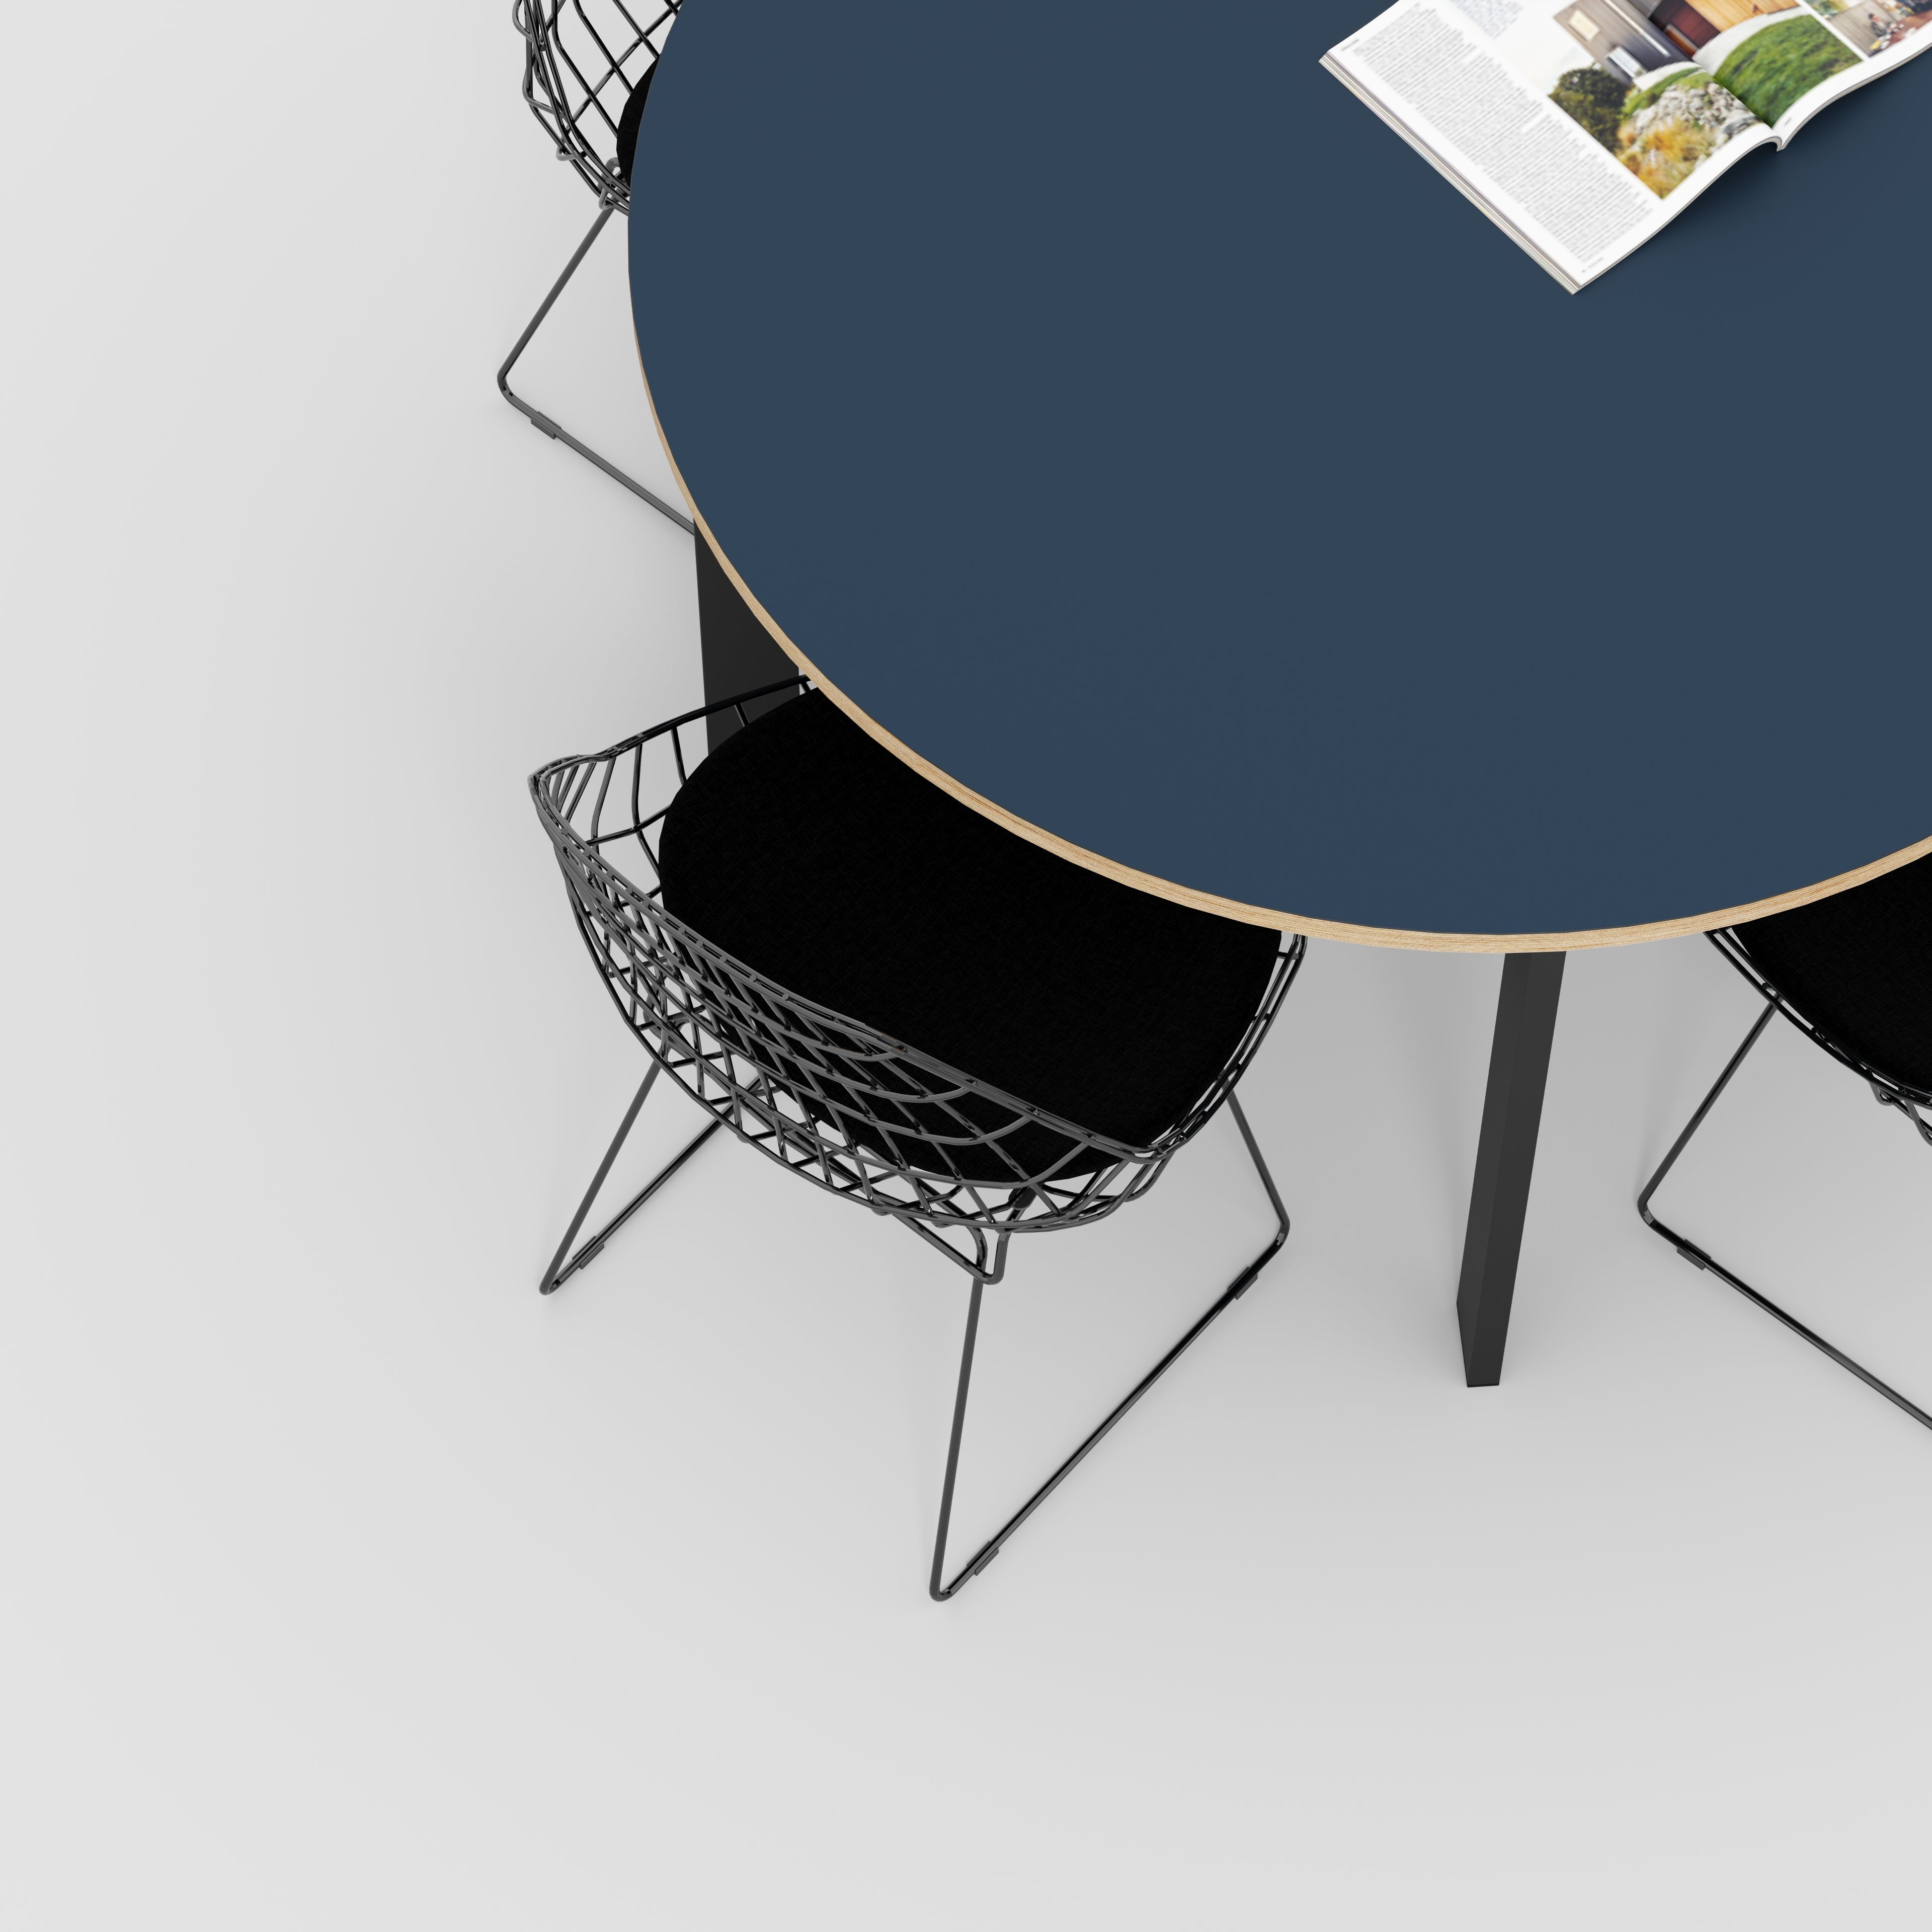 Round Table with Black Rectangular Single Pin Legs - Formica Night Sea Blue - 1200(dia) x 735(h)